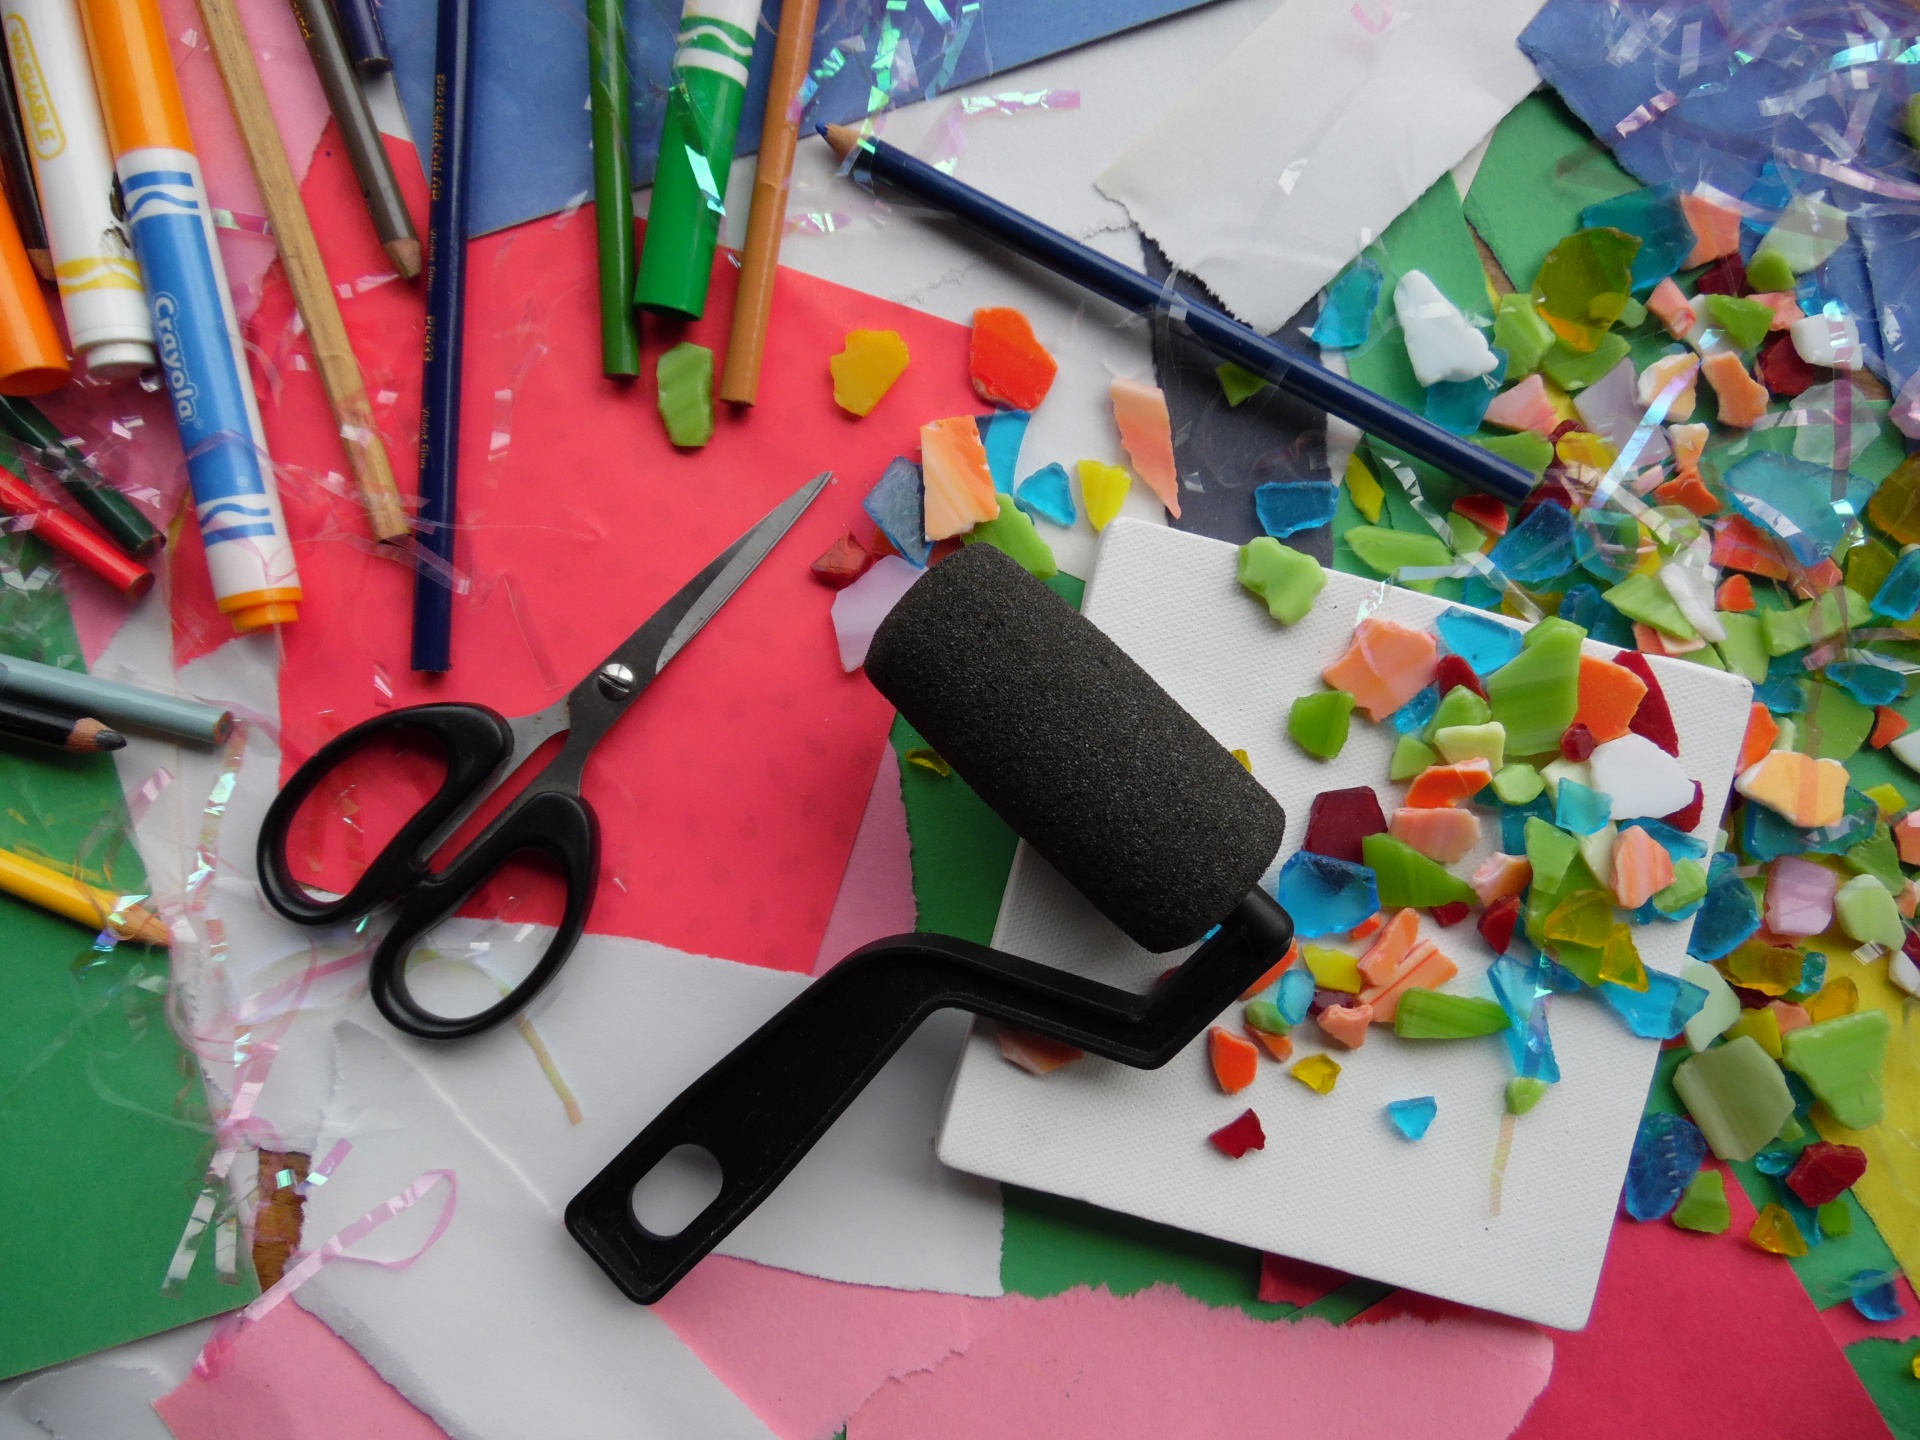 Art and craft supplies laid out on a table.